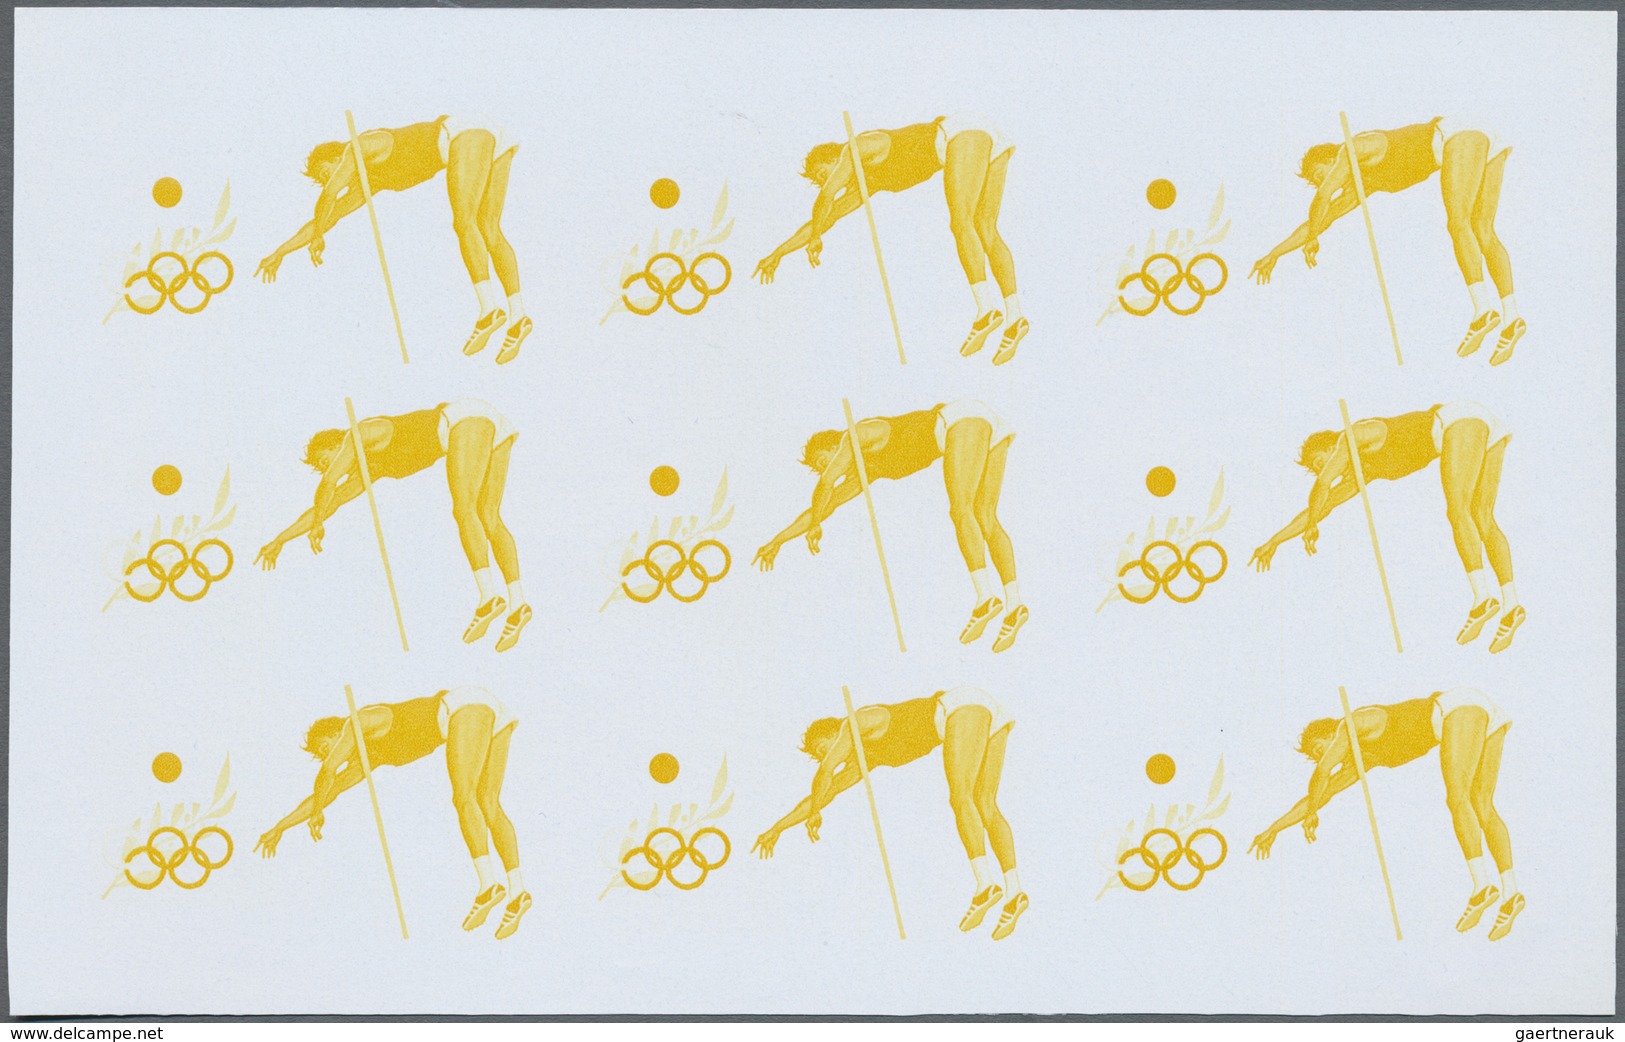 ** Thematik: Olympische Spiele / olympic games: 1971, Ajman. Imperforate progressive proof (8 phases) i